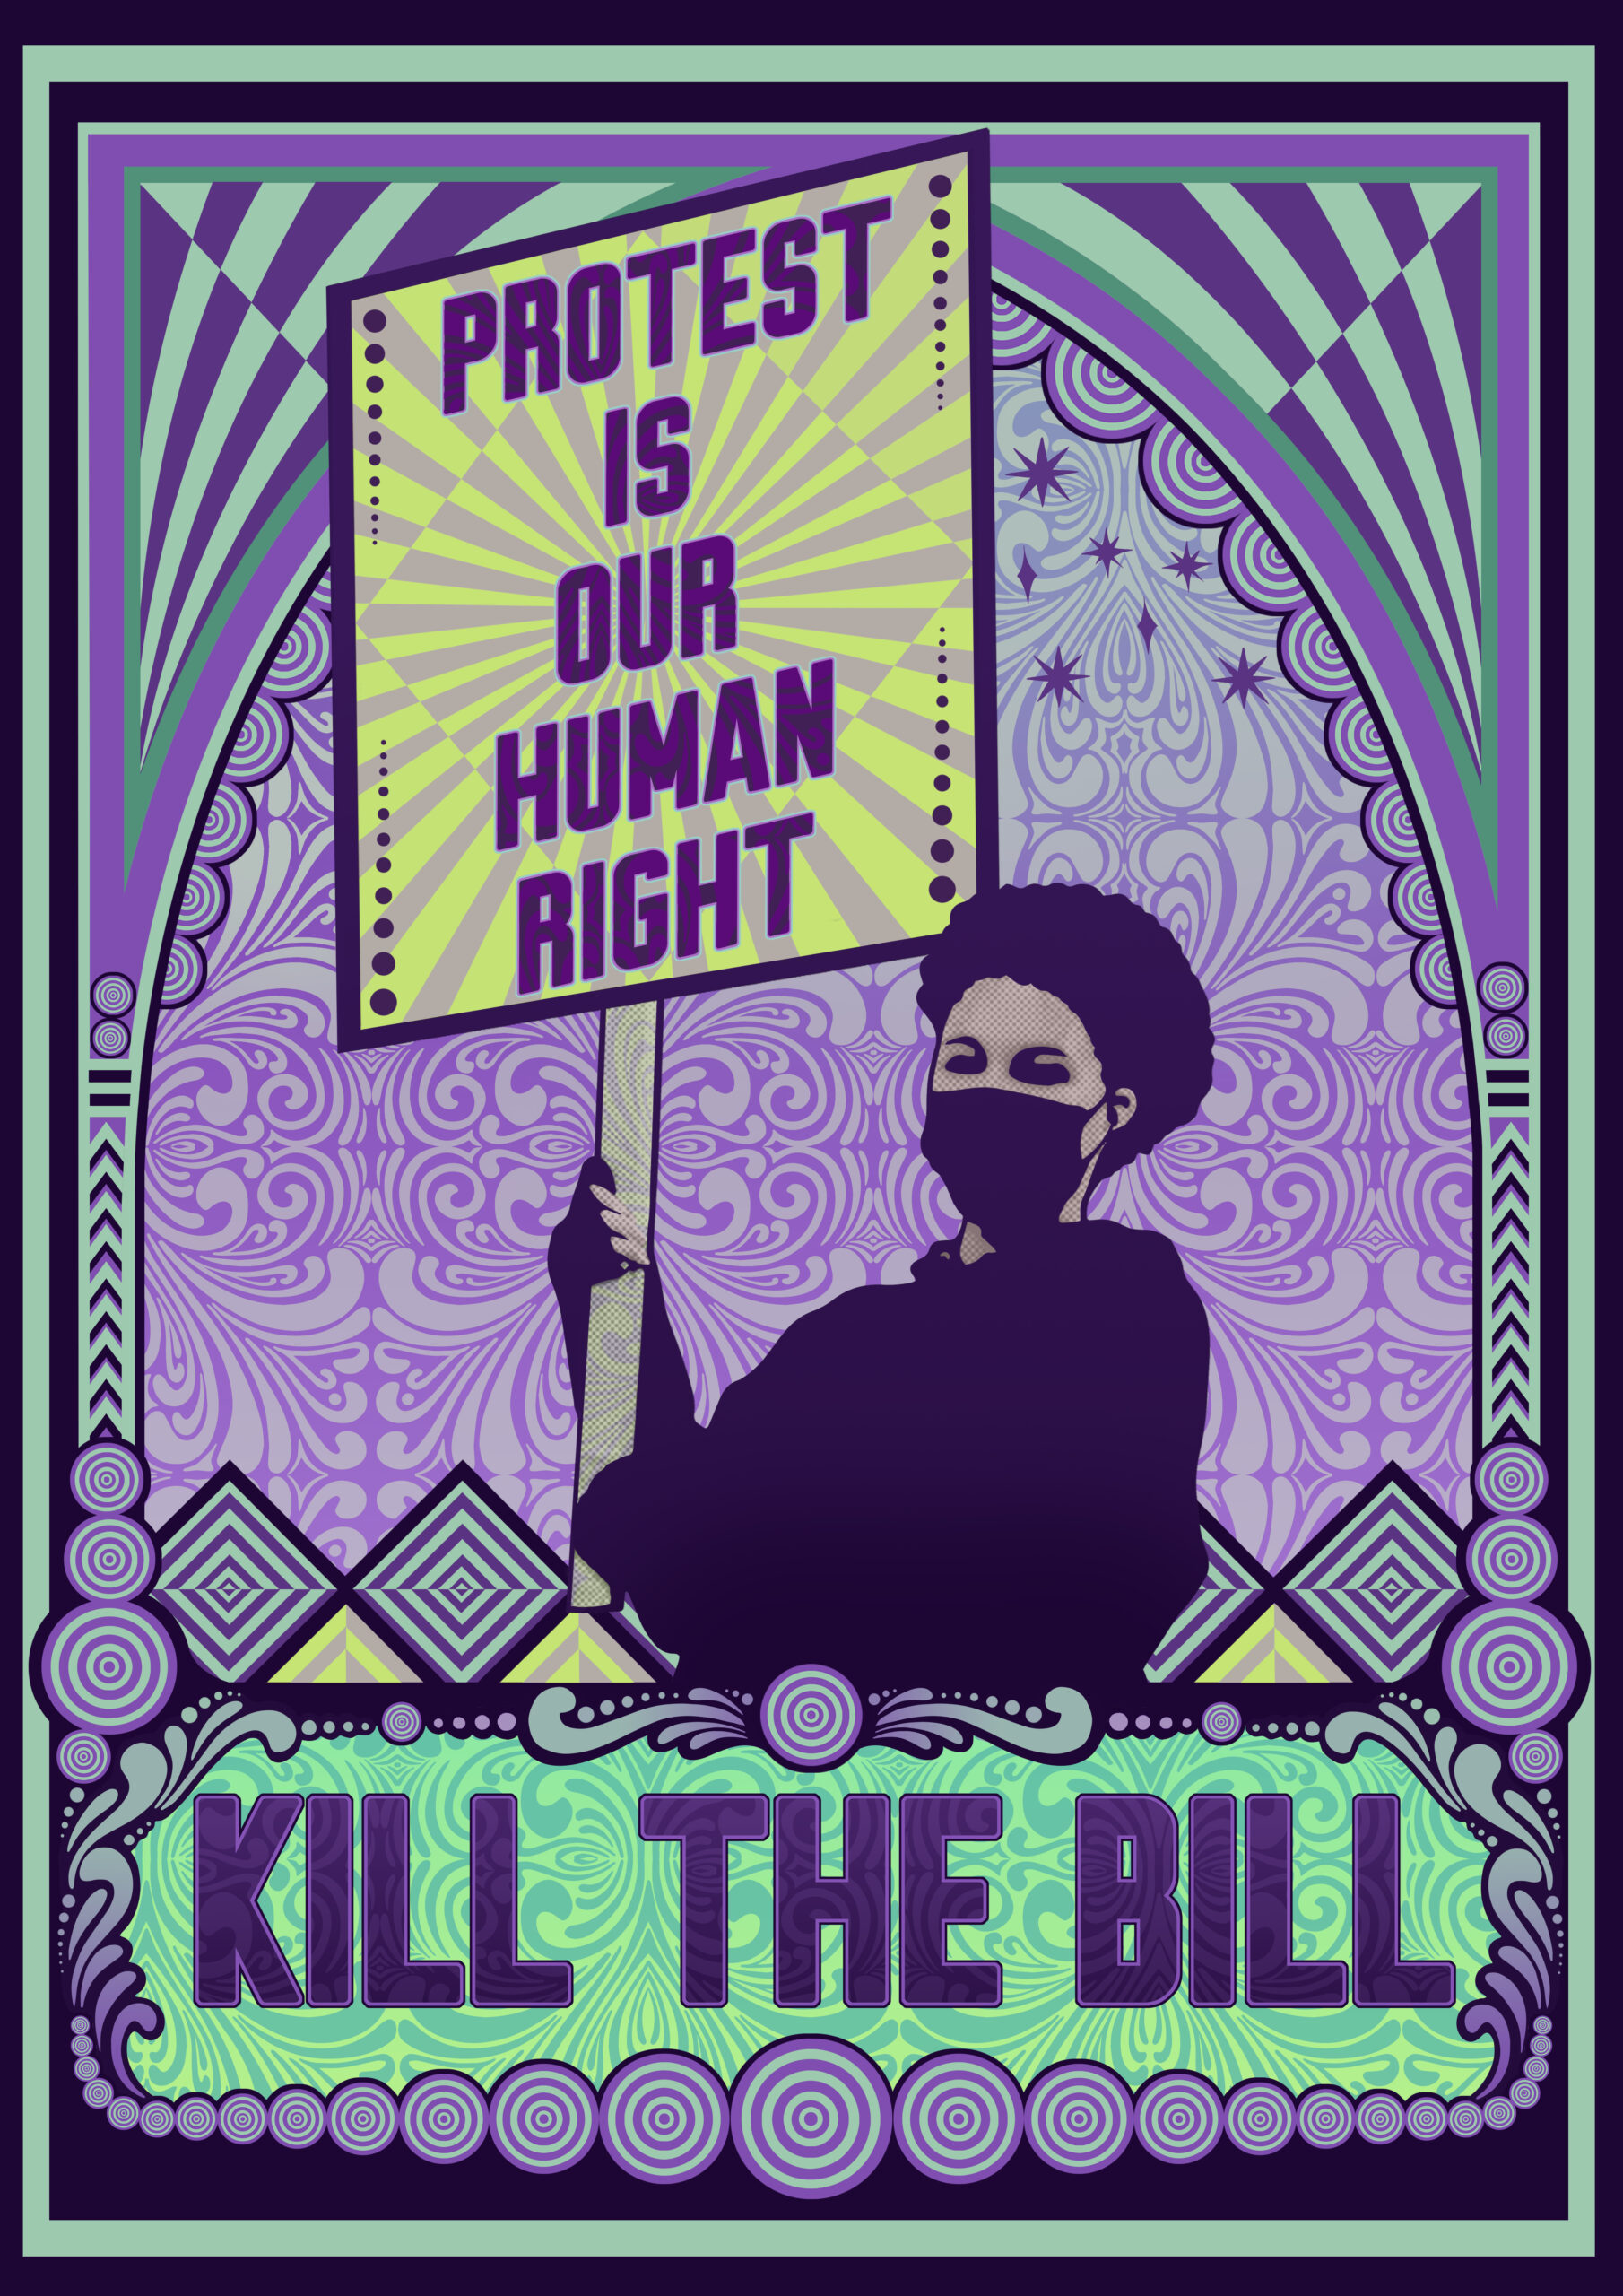 Stylised cartoon Kill the Bill poster, with a masked woman holding a placard saying "Protest Is Our Human Right".